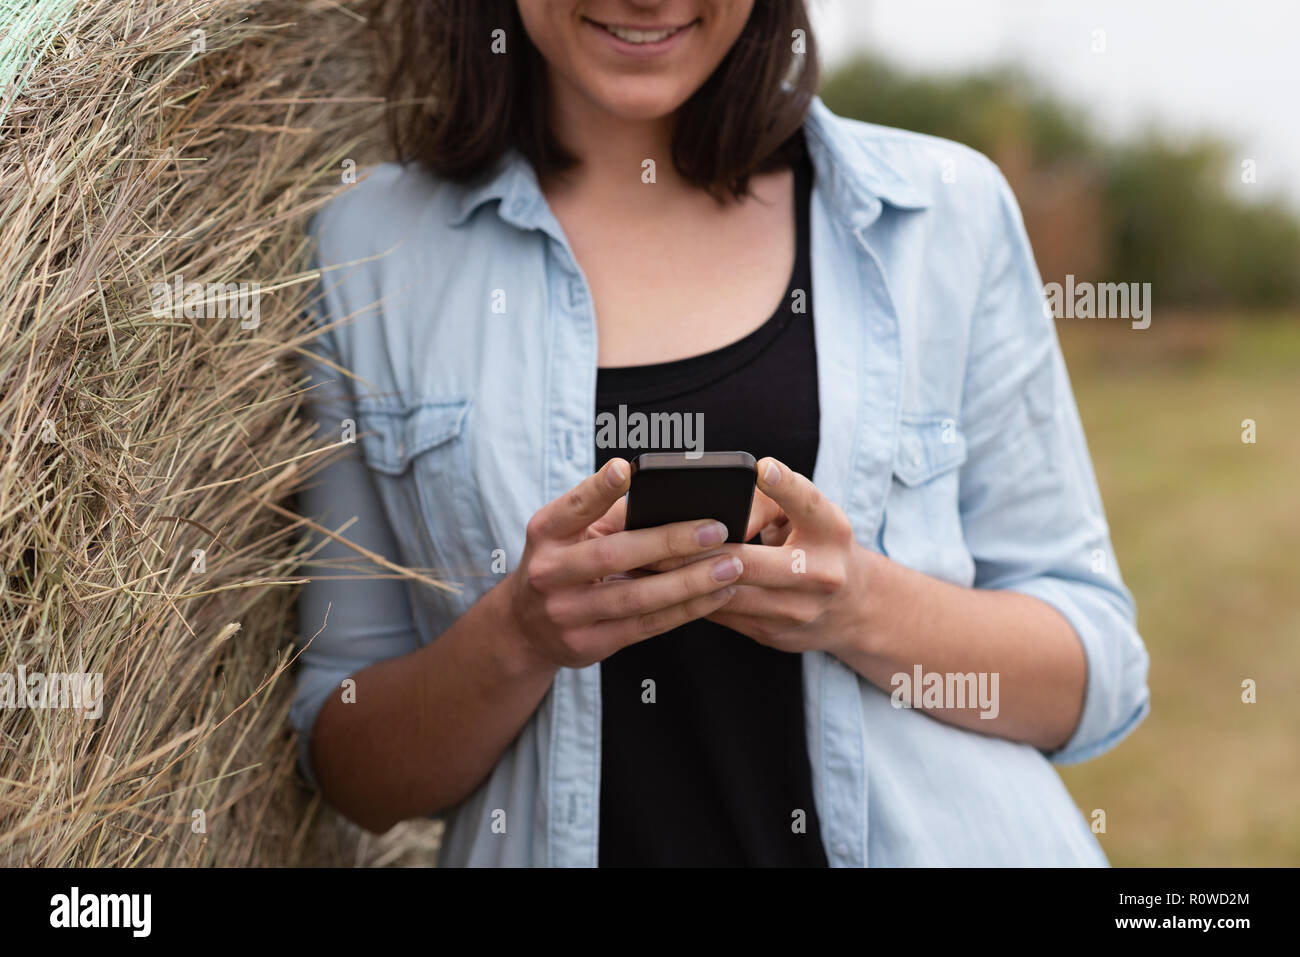 Woman using mobile phone while leaning on hay bale Stock Photo